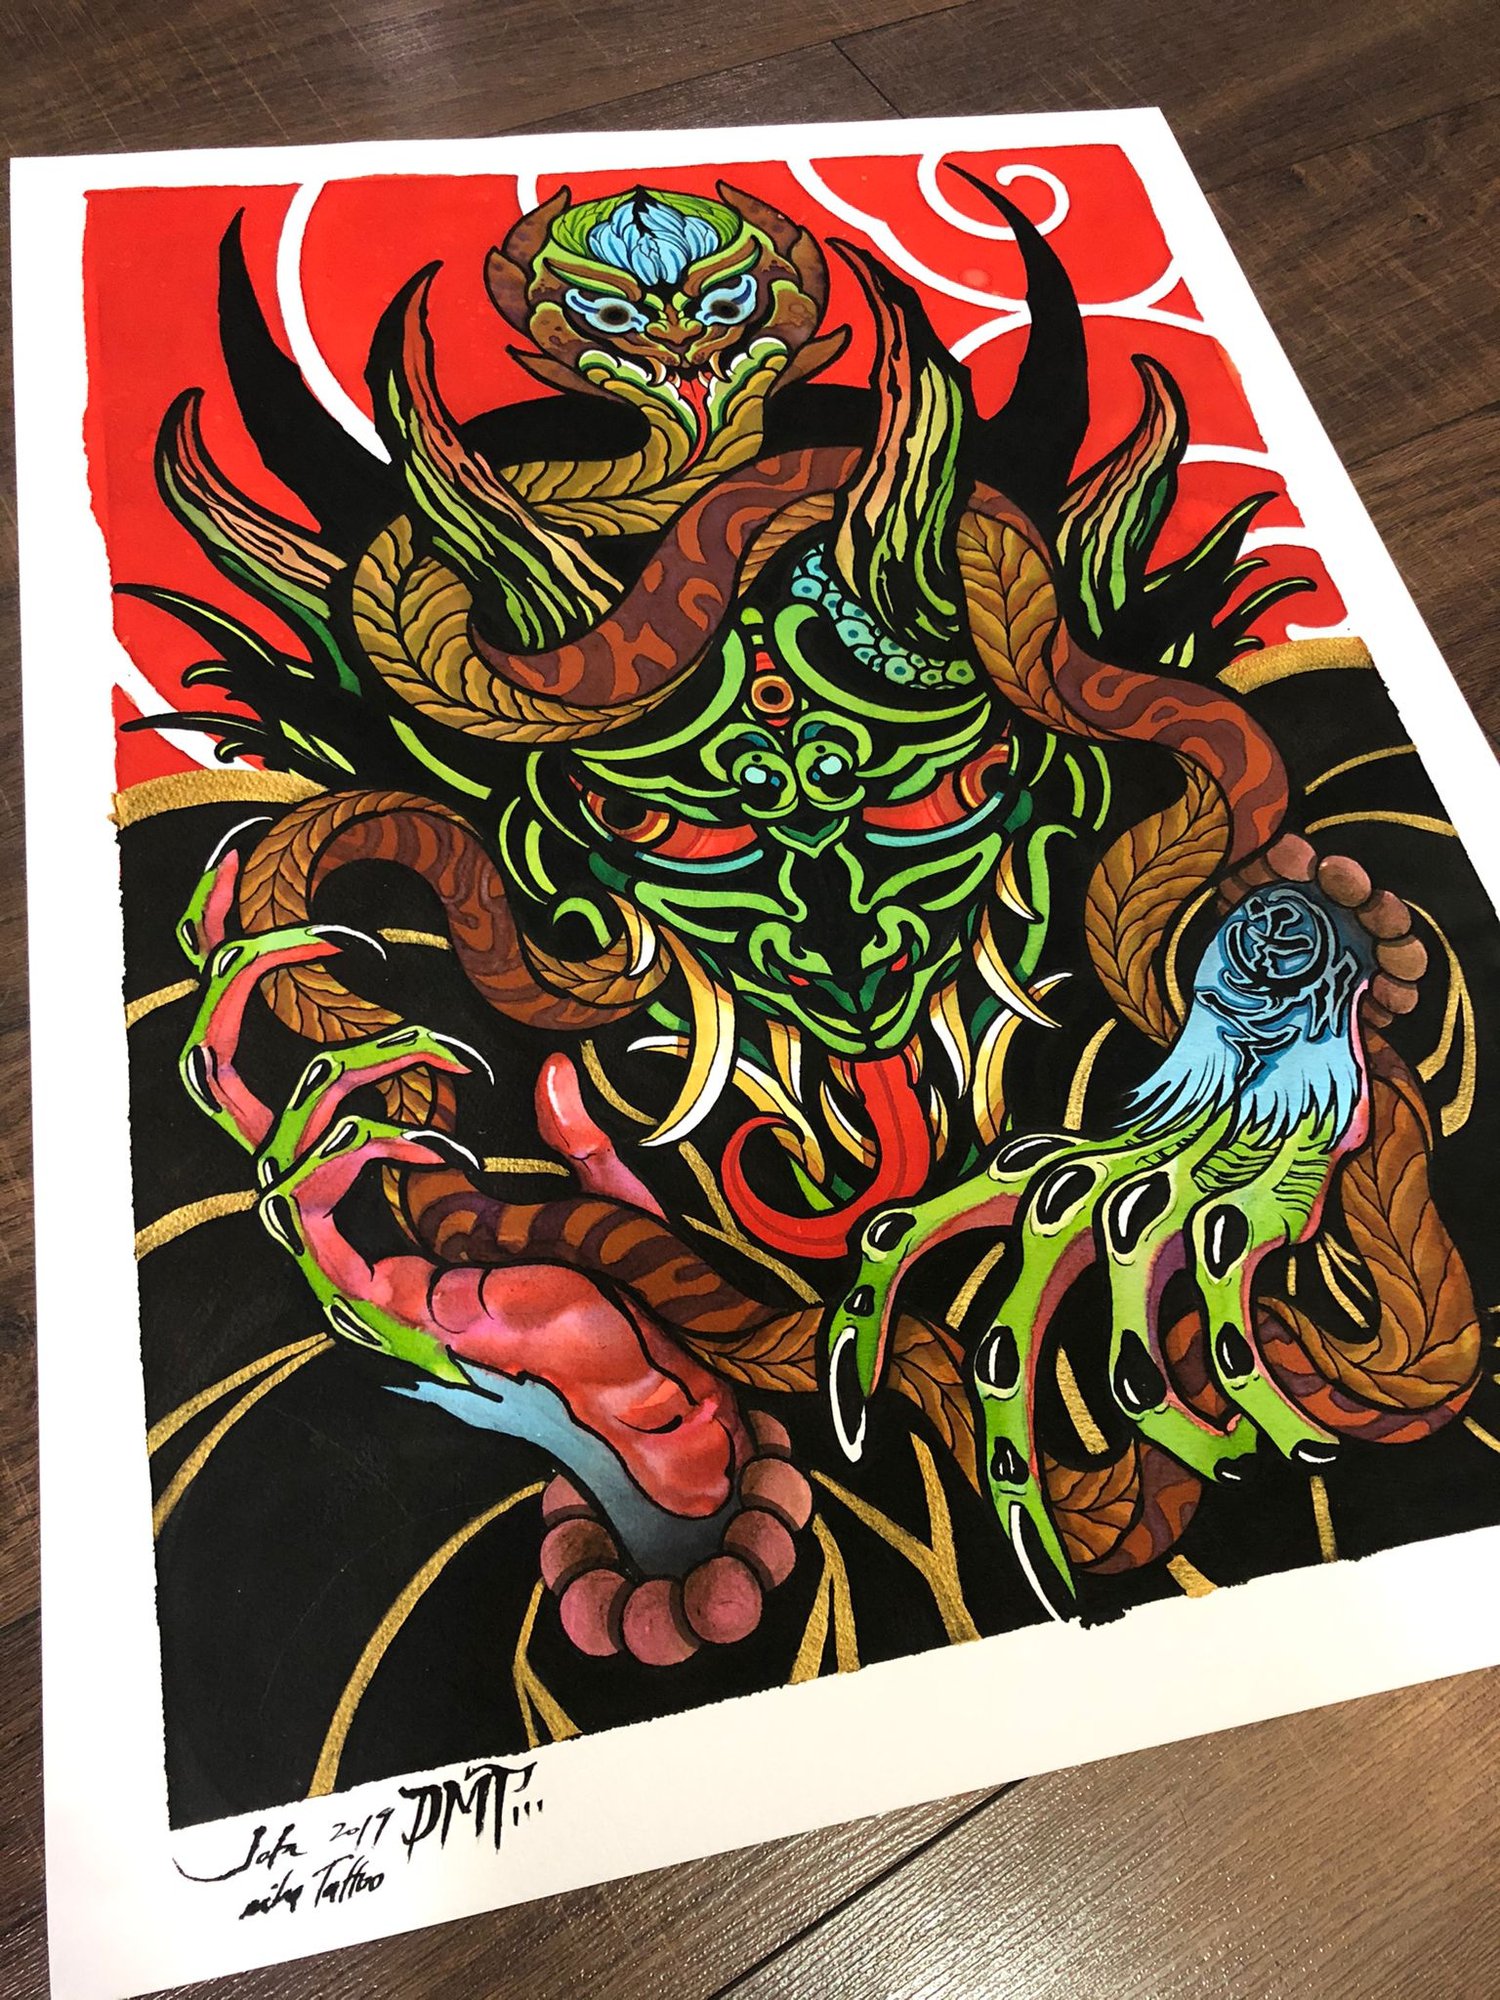 Image of DMT print by Jota